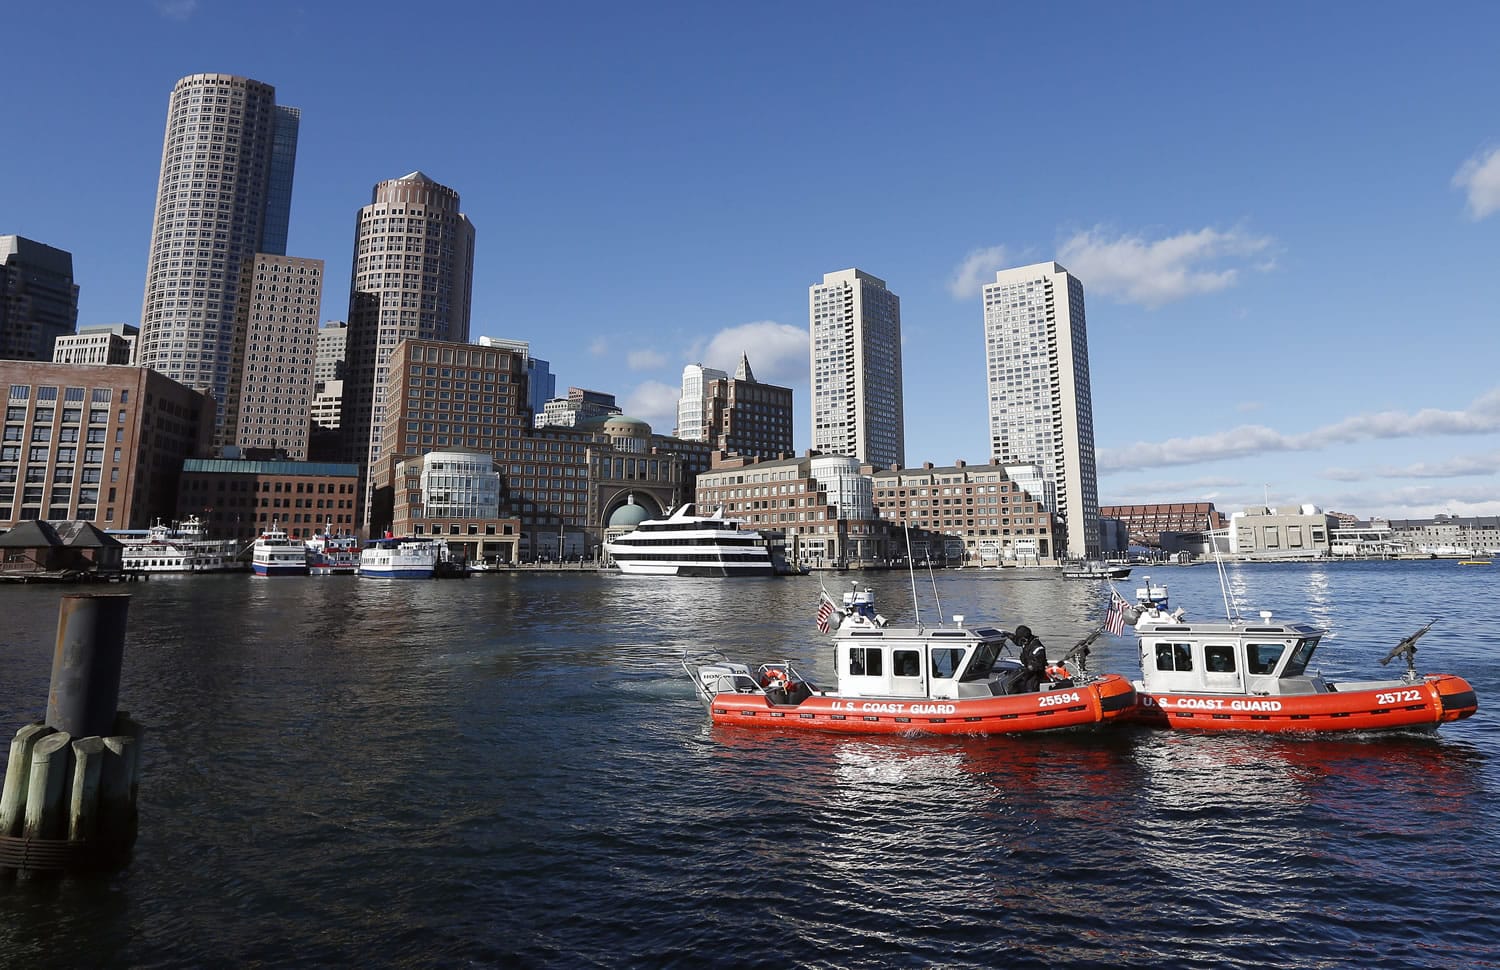 U.S. Coast Guard boats patrol the Boston Harbor outside the federal courthouse, Monday, Jan. 5, 2015, in Boston, during the first day of jury selection in the trial of Boston Marathon bombing suspect Dzhokhar Tsarnaev.